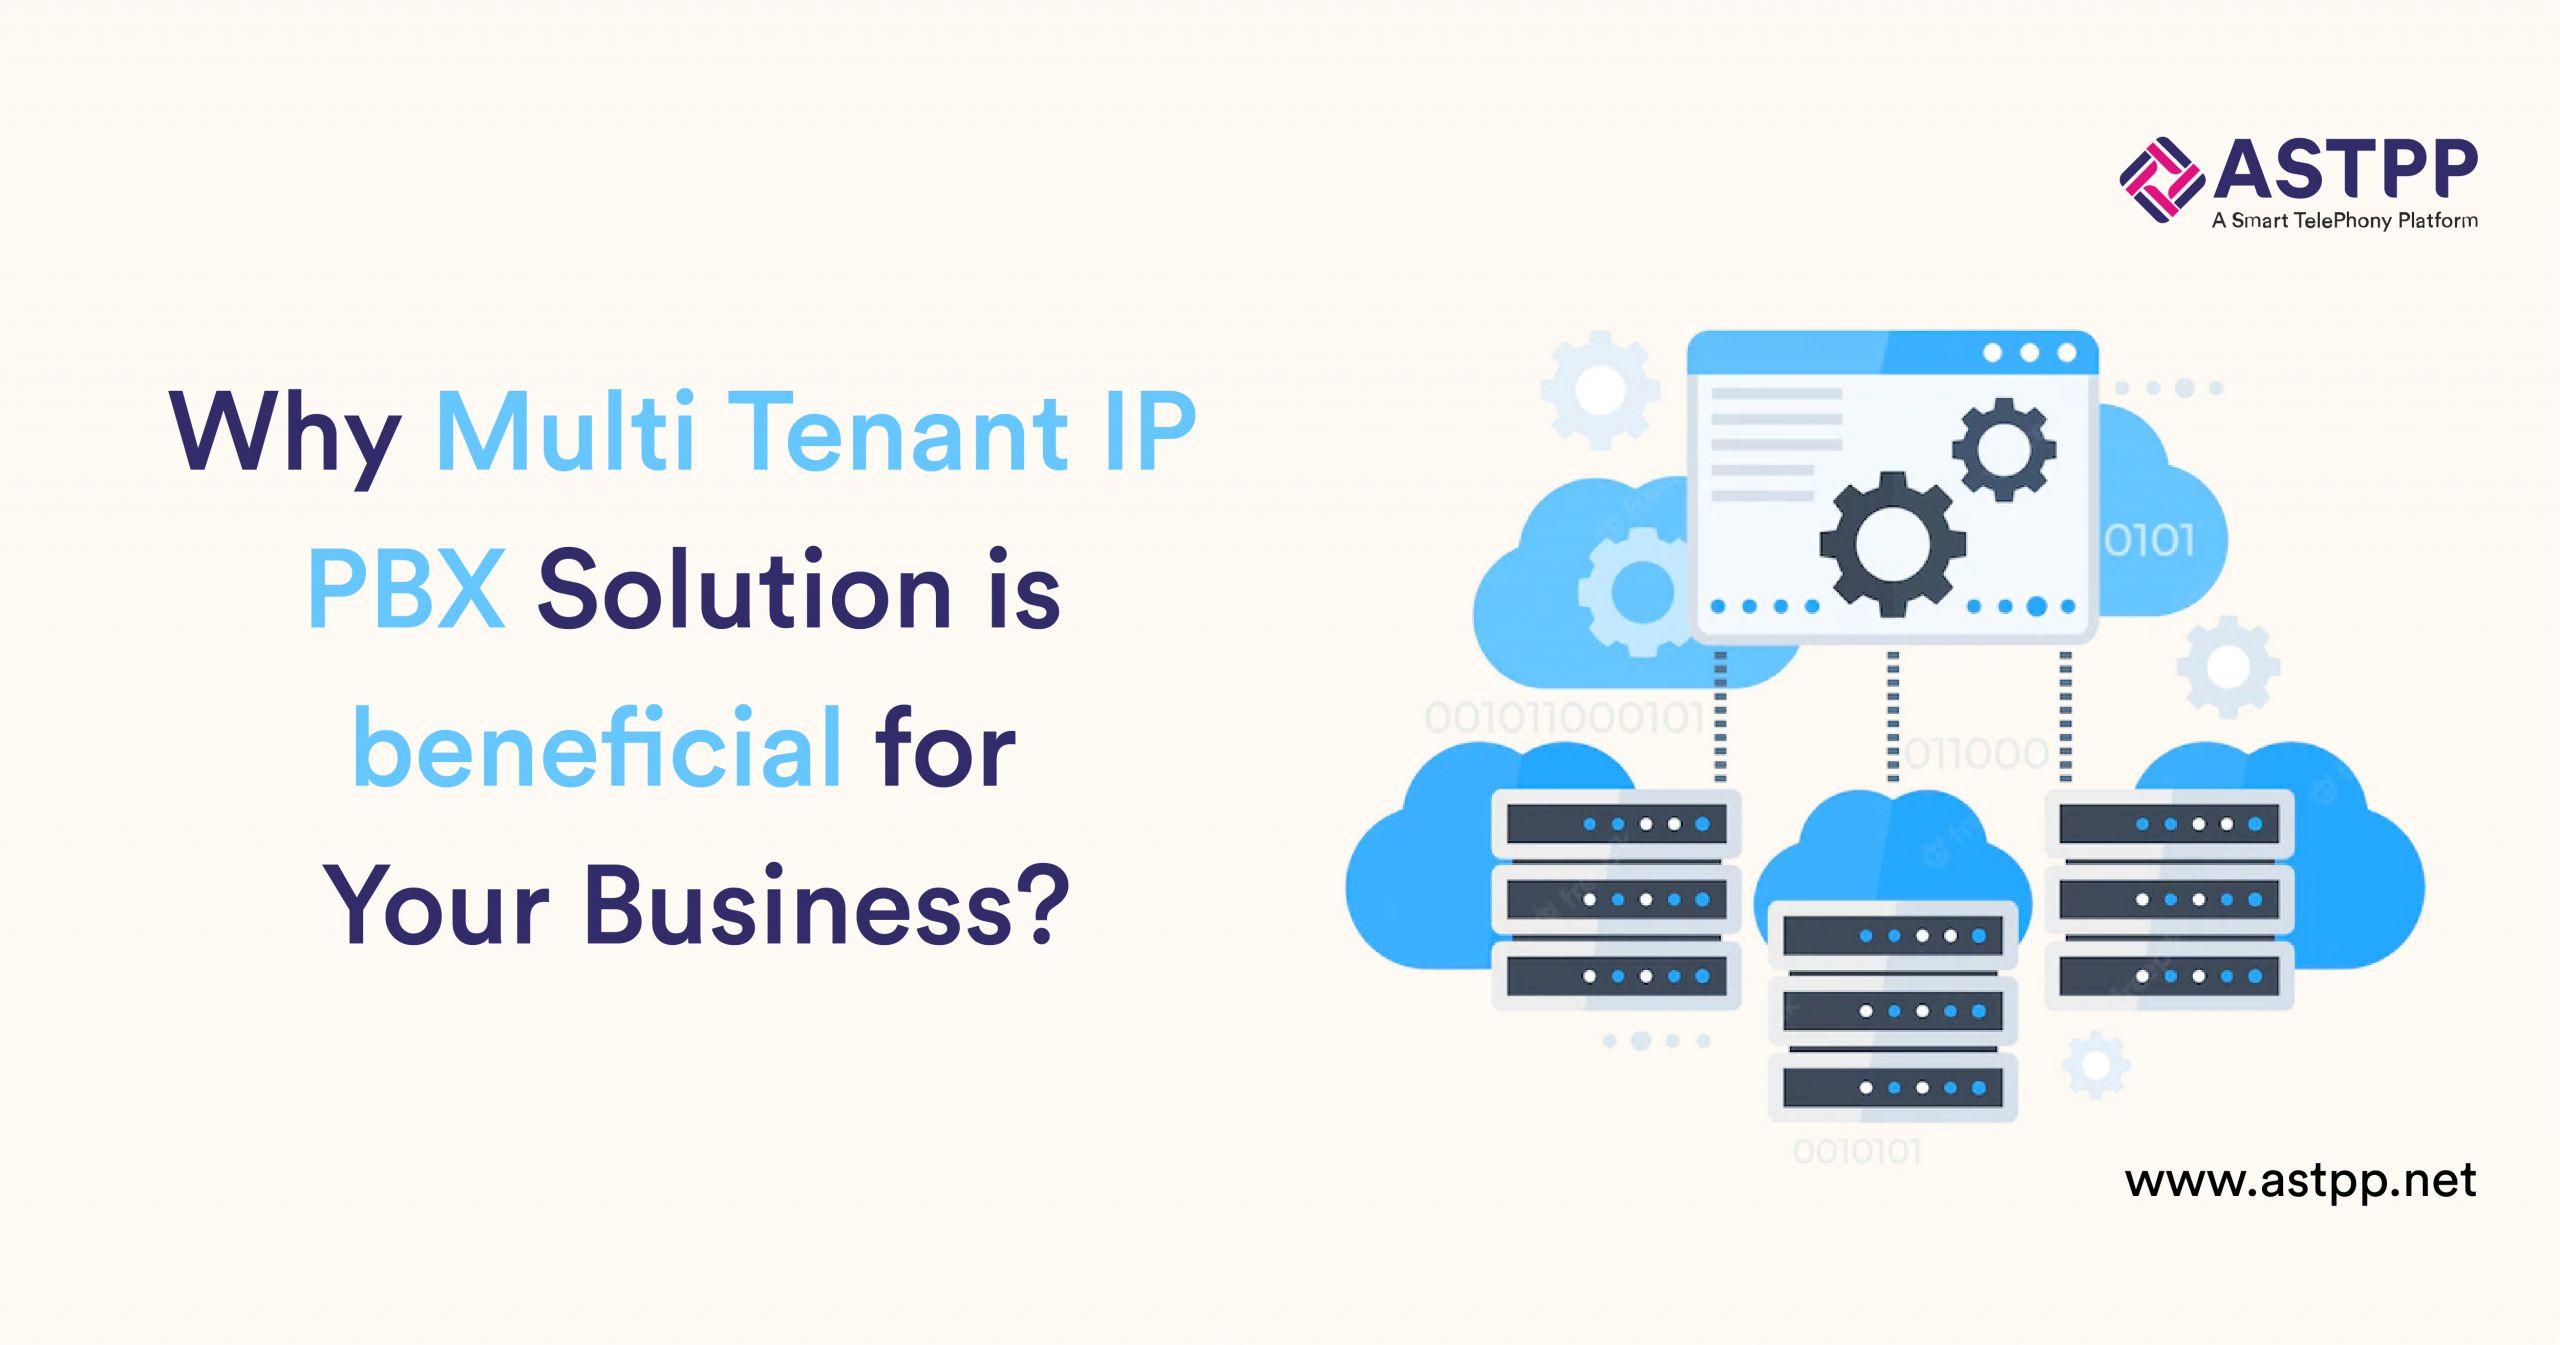 Multi Tenant IP PBX Solution - Top Reasons to Use it for Your Business